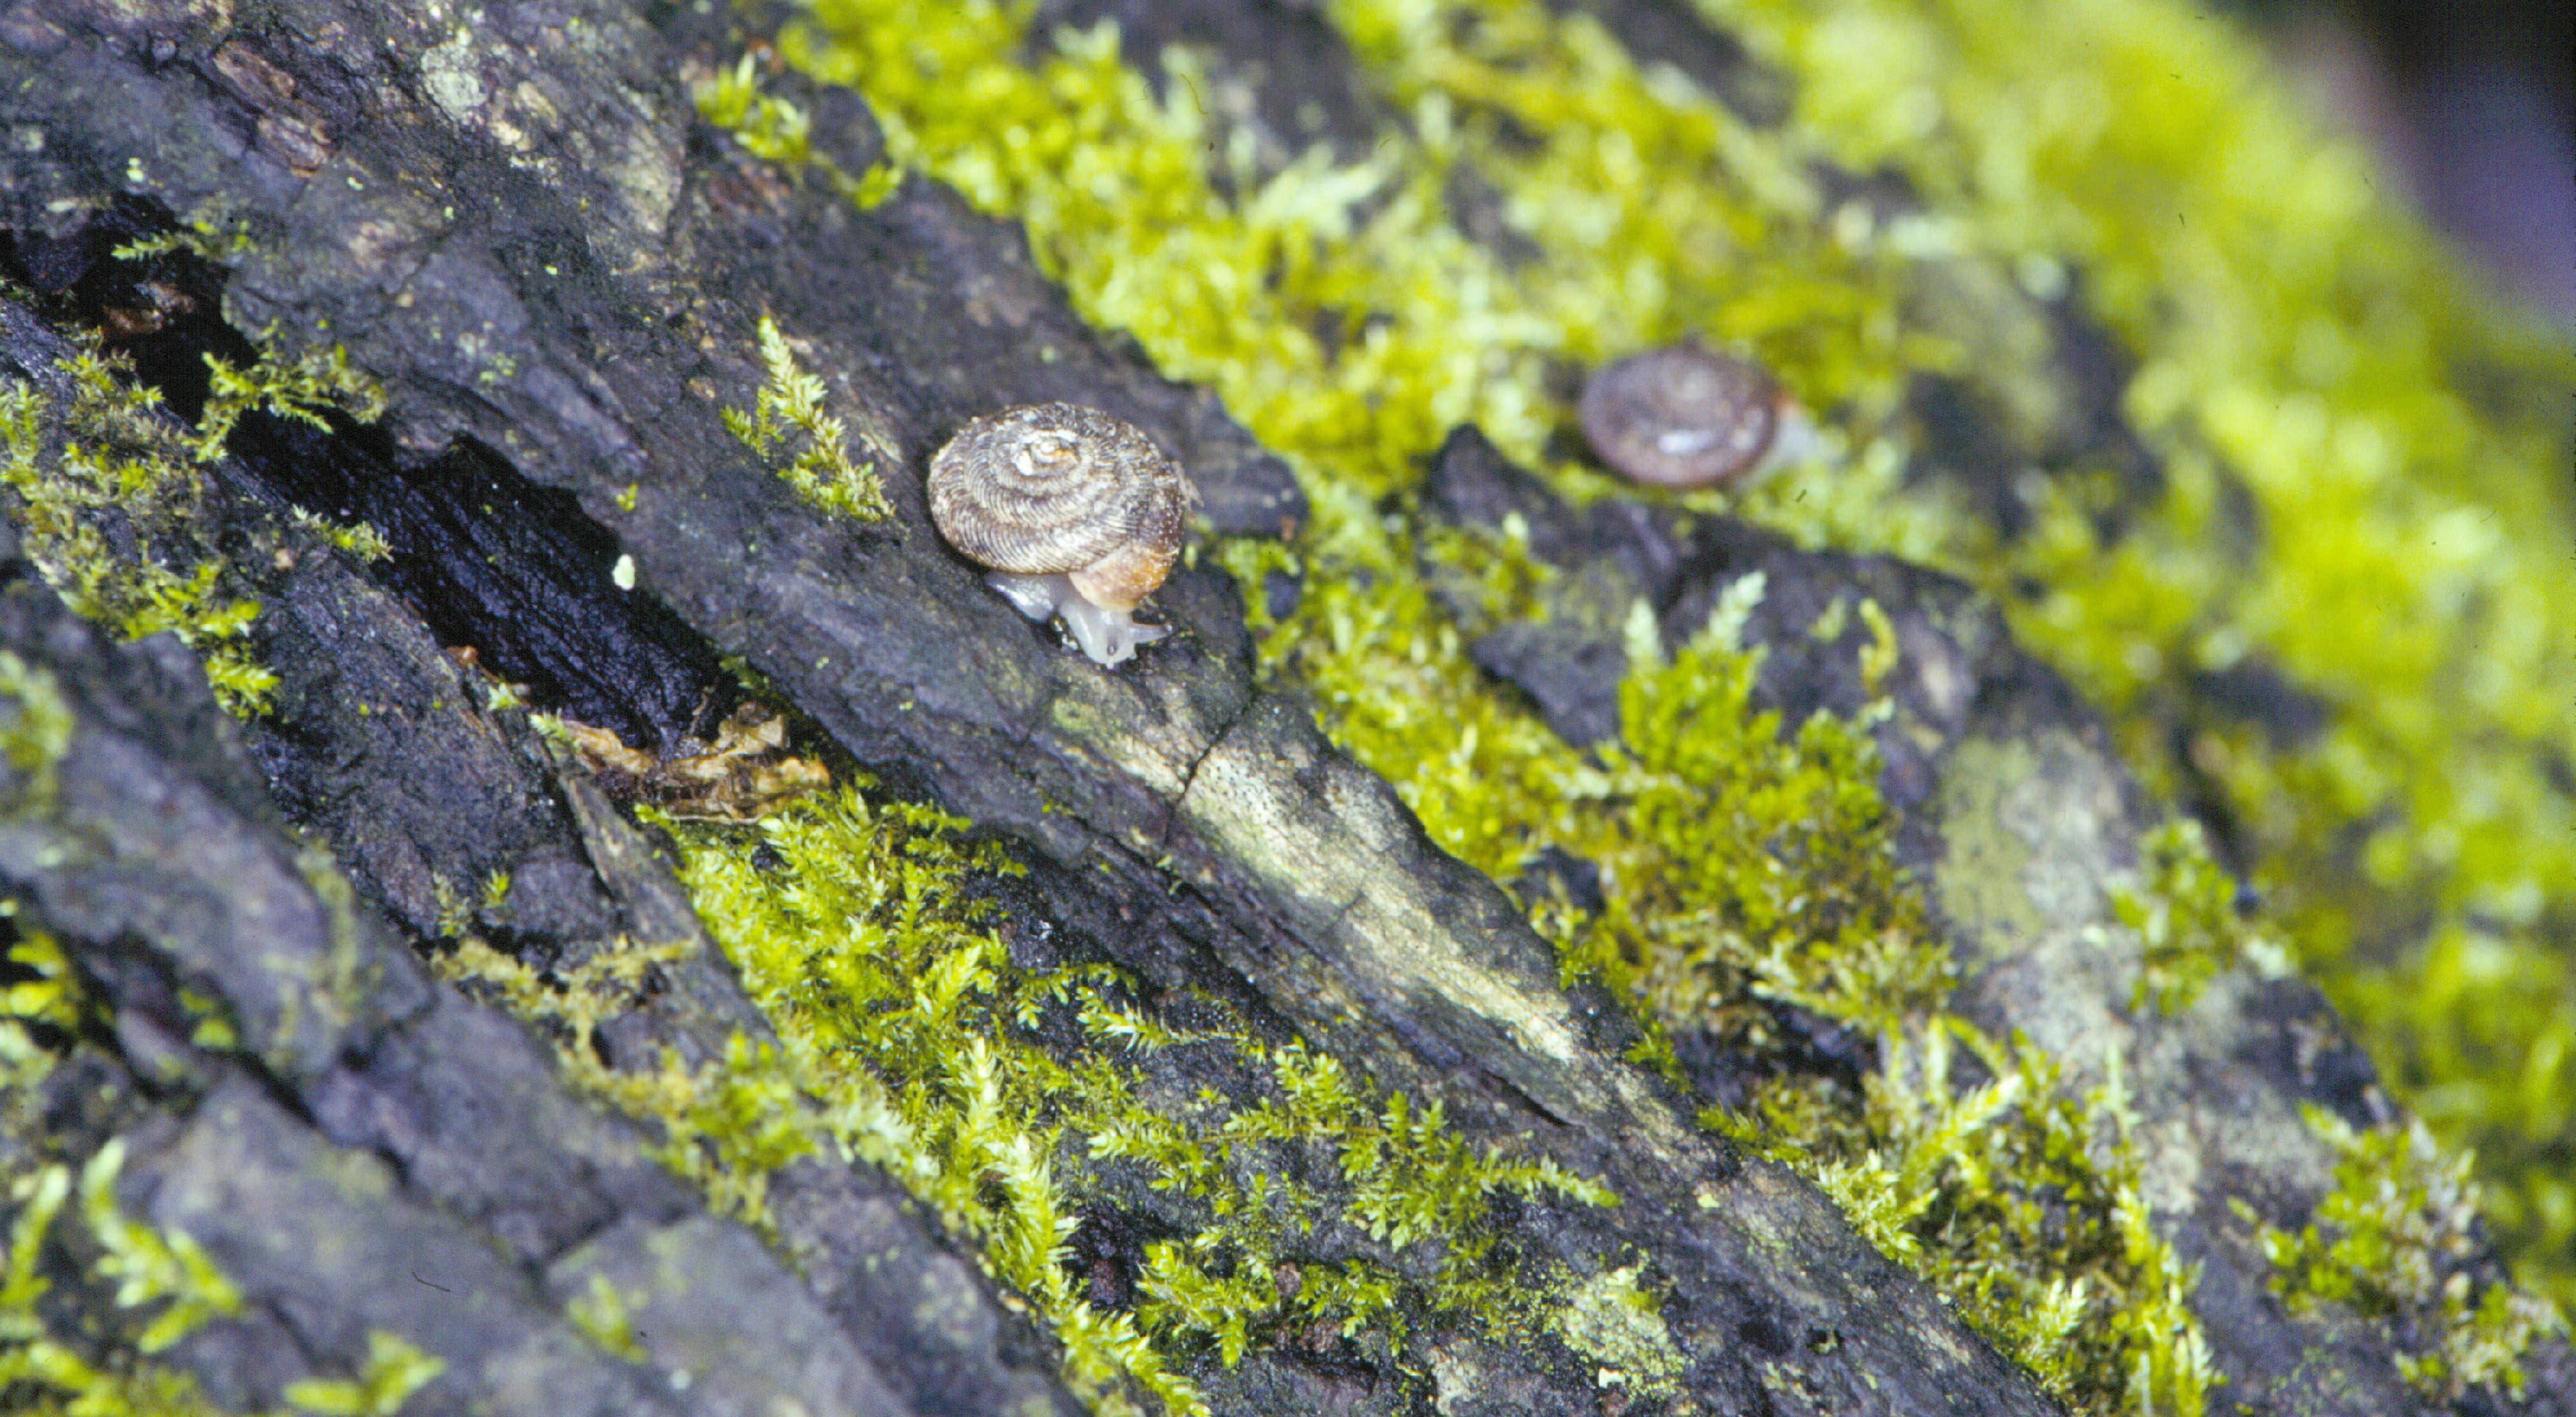 Pleistocene snails at Bluebell Hollow, located in the Driftless Area of Iowa.